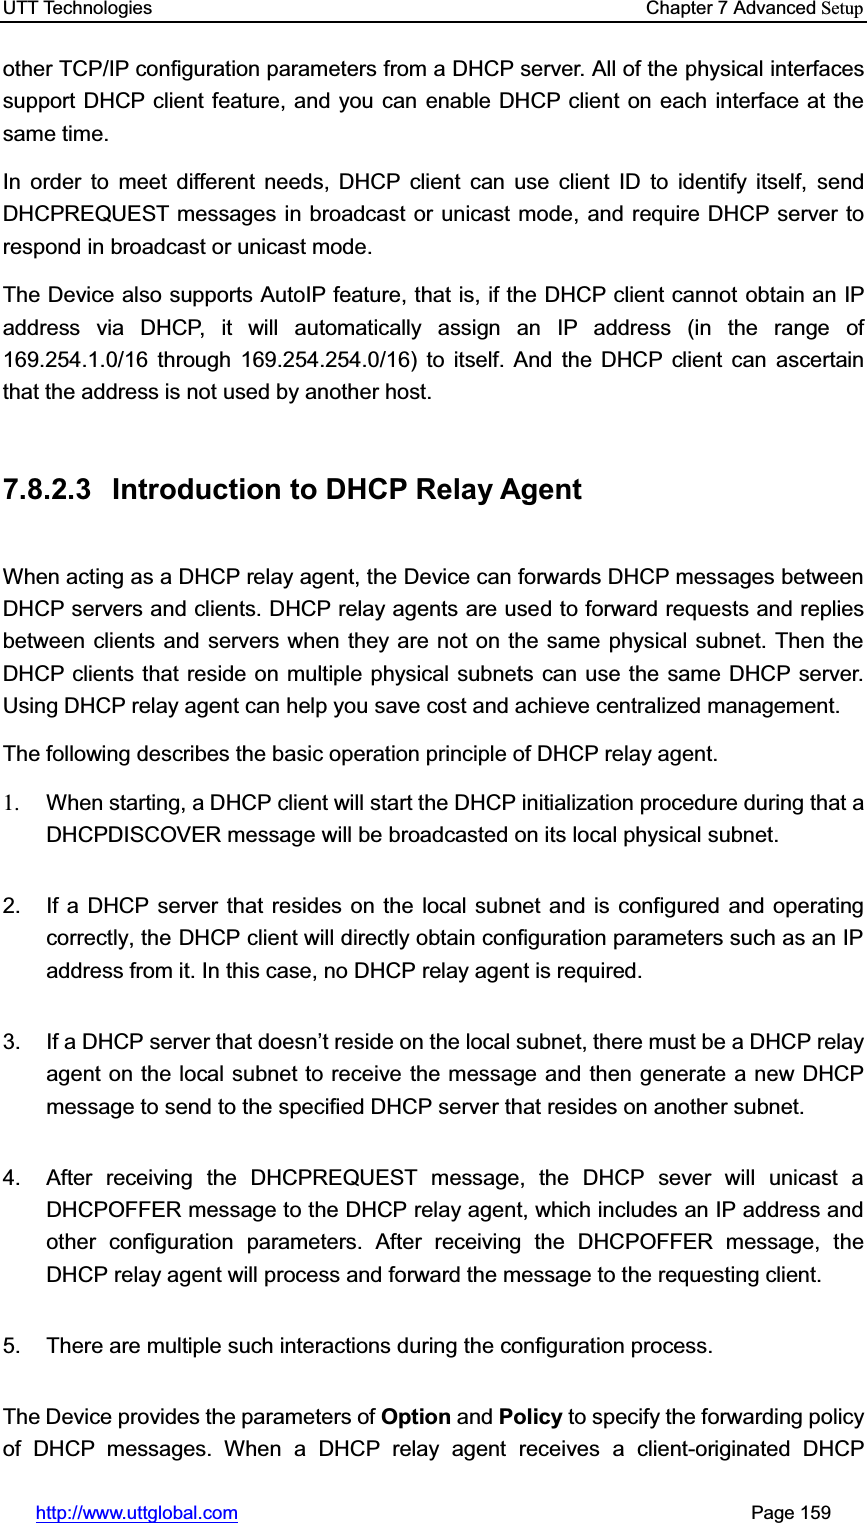 UTT Technologies    Chapter 7 Advanced Setuphttp://www.uttglobal.com                                                       Page 159 other TCP/IP configuration parameters from a DHCP server. All of the physical interfaces support DHCP client feature, and you can enable DHCP client on each interface at the same time. In order to meet different needs, DHCP client can use client ID to identify itself, send DHCPREQUEST messages in broadcast or unicast mode, and require DHCP server to respond in broadcast or unicast mode. The Device also supports AutoIP feature, that is, if the DHCP client cannot obtain an IP address via DHCP, it will automatically assign an IP address (in the range of 169.254.1.0/16 through 169.254.254.0/16) to itself. And the DHCP client can ascertain that the address is not used by another host. 7.8.2.3  Introduction to DHCP Relay Agent When acting as a DHCP relay agent, the Device can forwards DHCP messages between DHCP servers and clients. DHCP relay agents are used to forward requests and replies between clients and servers when they are not on the same physical subnet. Then the DHCP clients that reside on multiple physical subnets can use the same DHCP server. Using DHCP relay agent can help you save cost and achieve centralized management. The following describes the basic operation principle of DHCP relay agent. 1. When starting, a DHCP client will start the DHCP initialization procedure during that a DHCPDISCOVER message will be broadcasted on its local physical subnet.2.  If a DHCP server that resides on the local subnet and is configured and operating correctly, the DHCP client will directly obtain configuration parameters such as an IP address from it. In this case, no DHCP relay agent is required. 3.  If a DHCP server that doesn¶t reside on the local subnet, there must be a DHCP relay agent on the local subnet to receive the message and then generate a new DHCP message to send to the specified DHCP server that resides on another subnet. 4.  After receiving the DHCPREQUEST message, the DHCP sever will unicast a DHCPOFFER message to the DHCP relay agent, which includes an IP address and other configuration parameters. After receiving the DHCPOFFER message, the DHCP relay agent will process and forward the message to the requesting client.   5.  There are multiple such interactions during the configuration process. The Device provides the parameters of Option and Policy to specify the forwarding policy of DHCP messages. When a DHCP relay agent receives a client-originated DHCP 